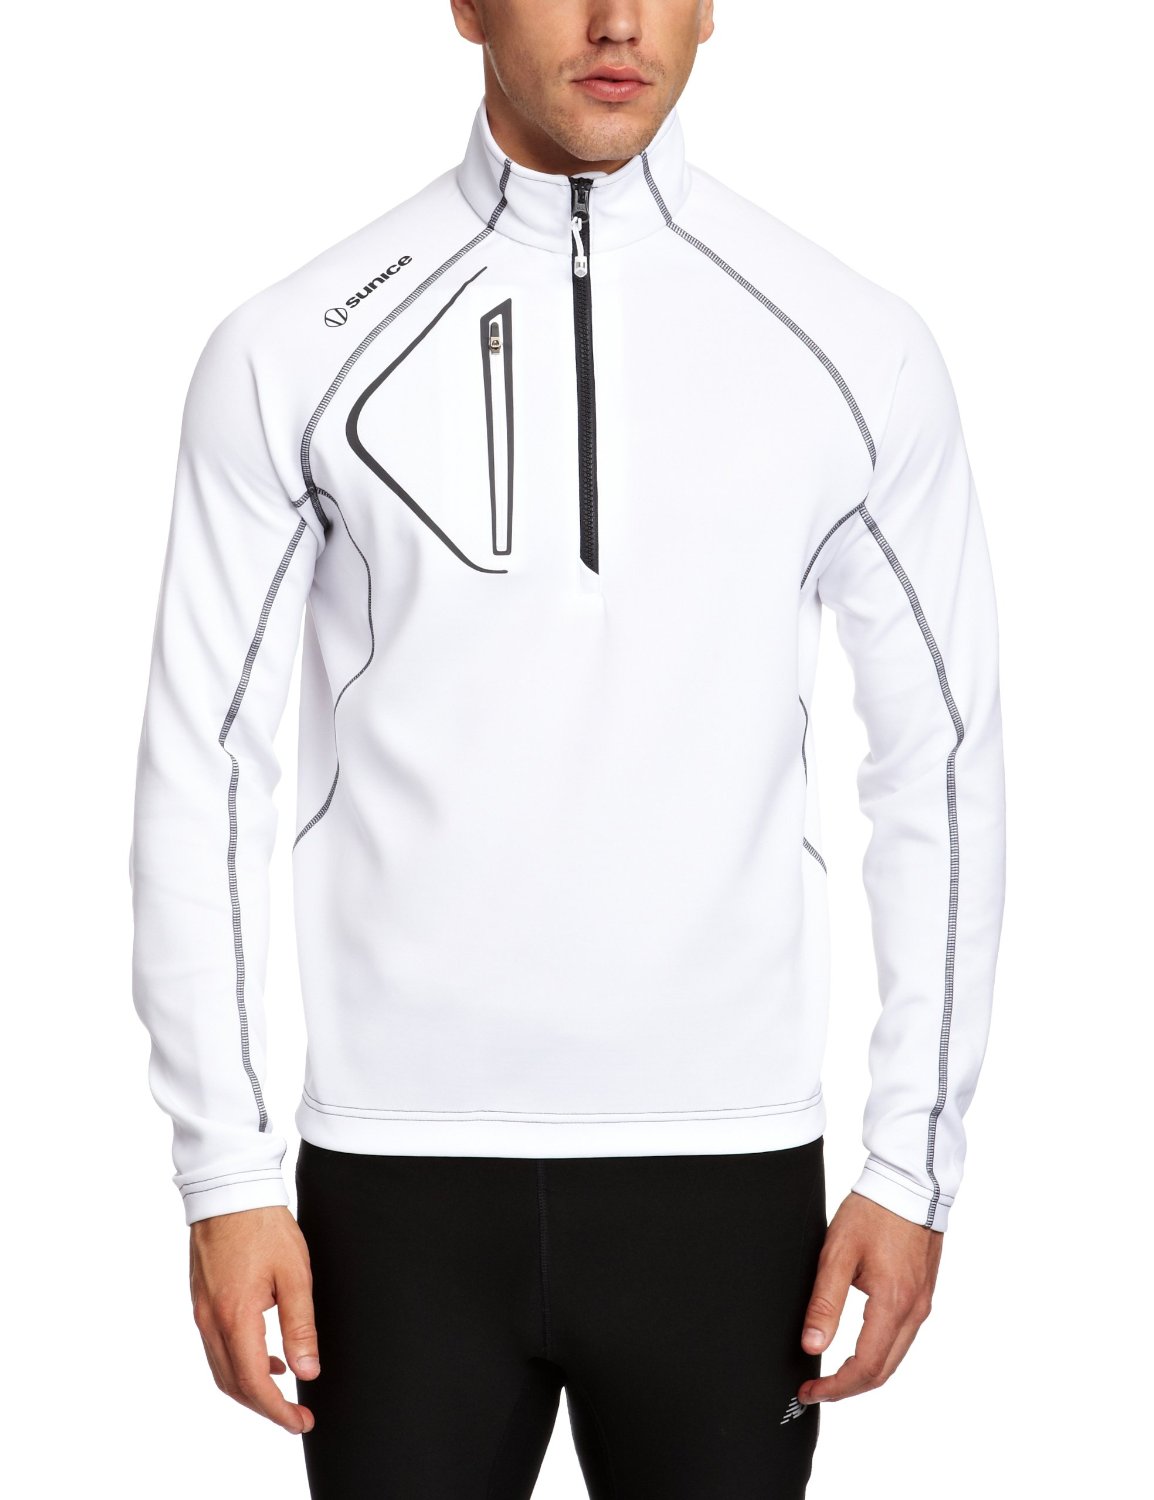 Mens Sunice Mens Allendale Thermal Layer Golf Jackets